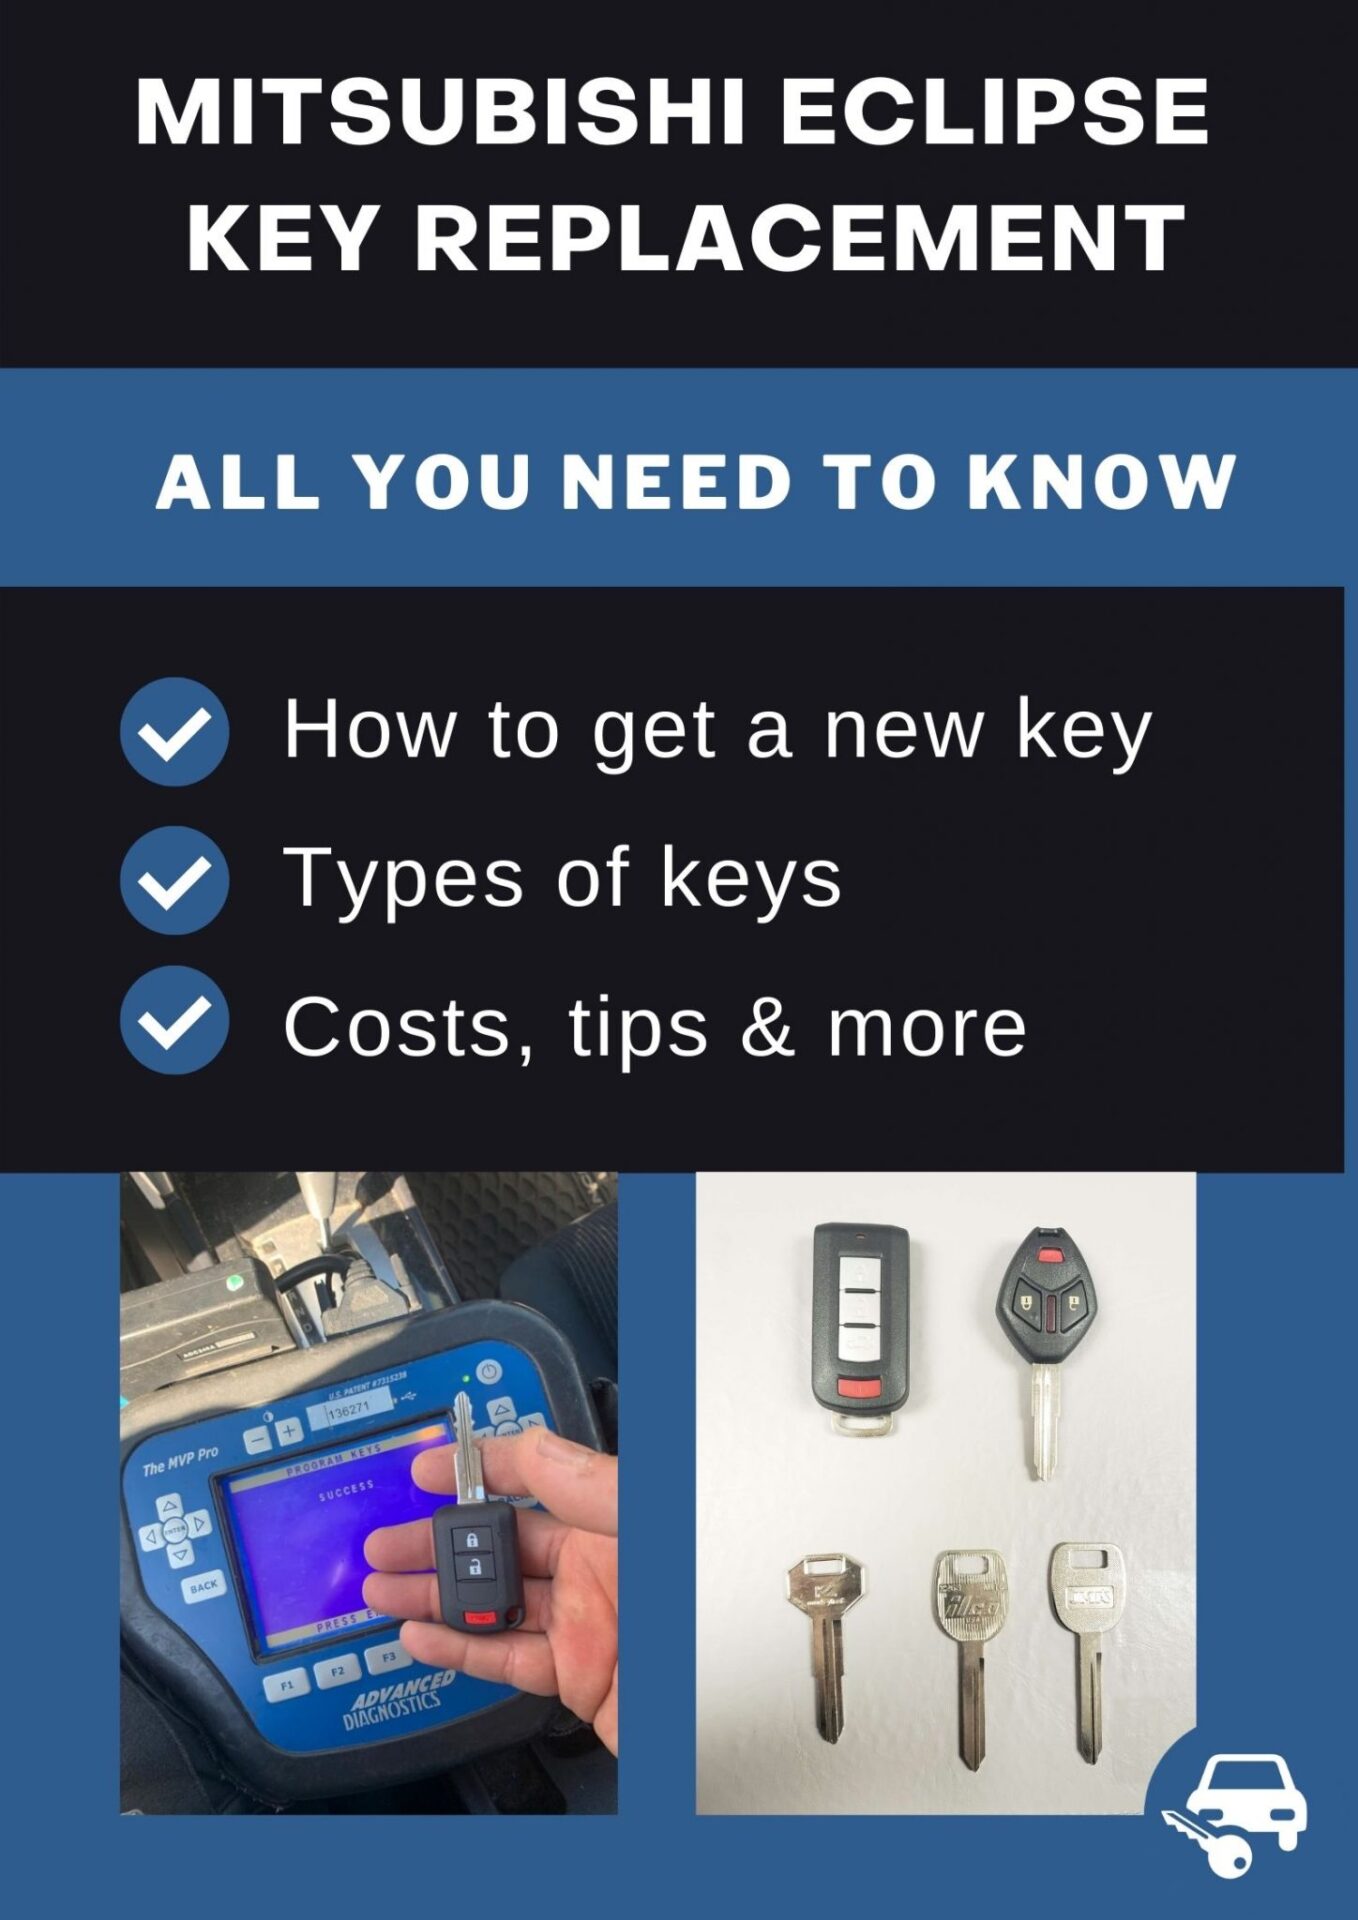 Mitsubishi Eclipse Key Replacement What To Do, Options, Costs & More